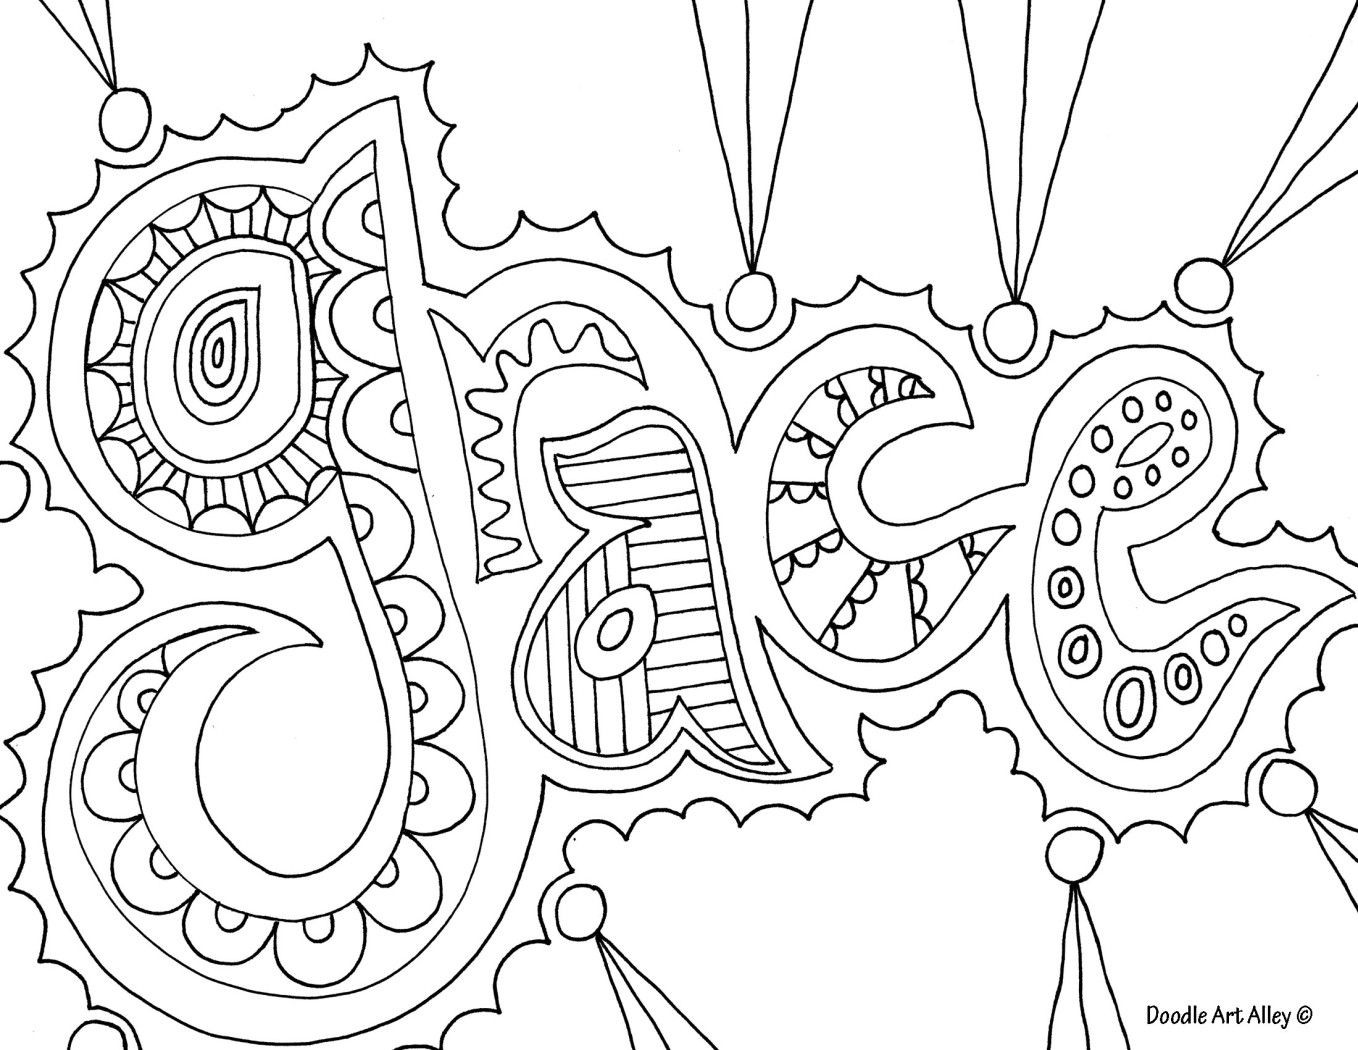 Coloring Pages For Teens Love
 Doodle art grace nice coloring page for older kids